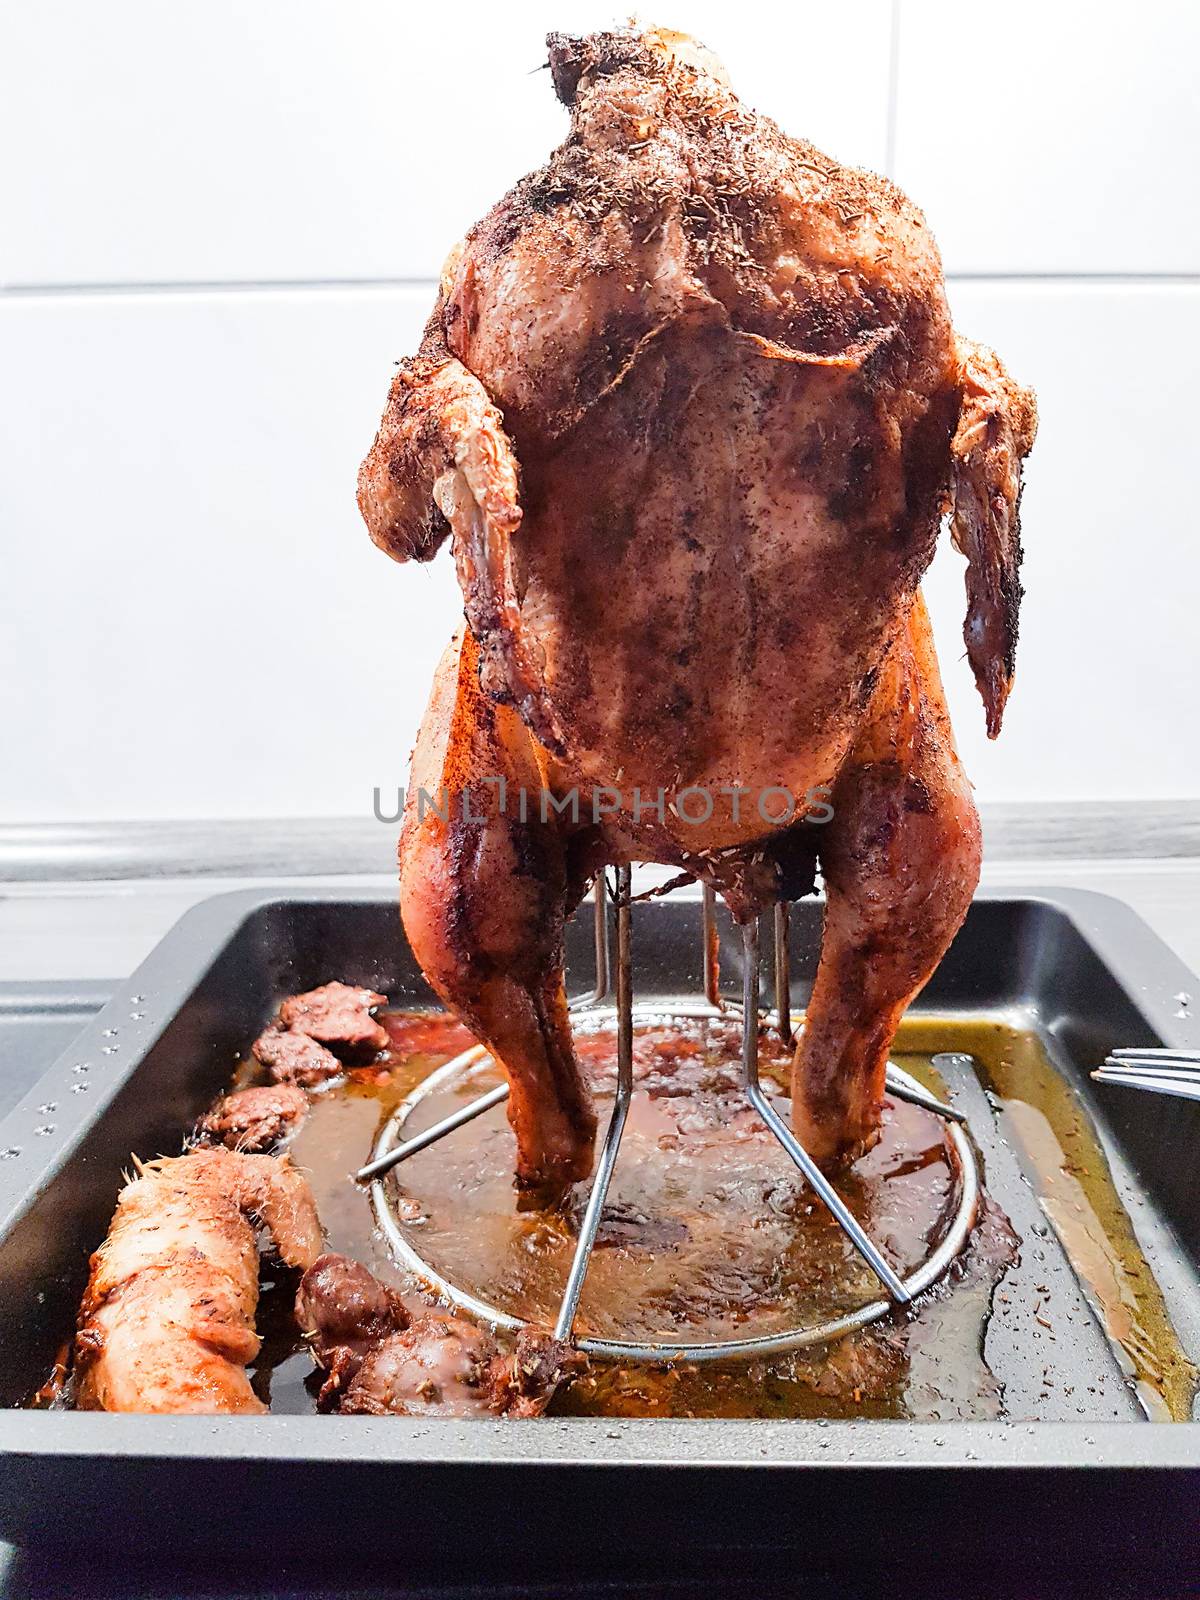 Grilled chicken, grilled, sprinkled, seasoned and grilled on the chicken holder.
Focus of the main motive of this image as desired